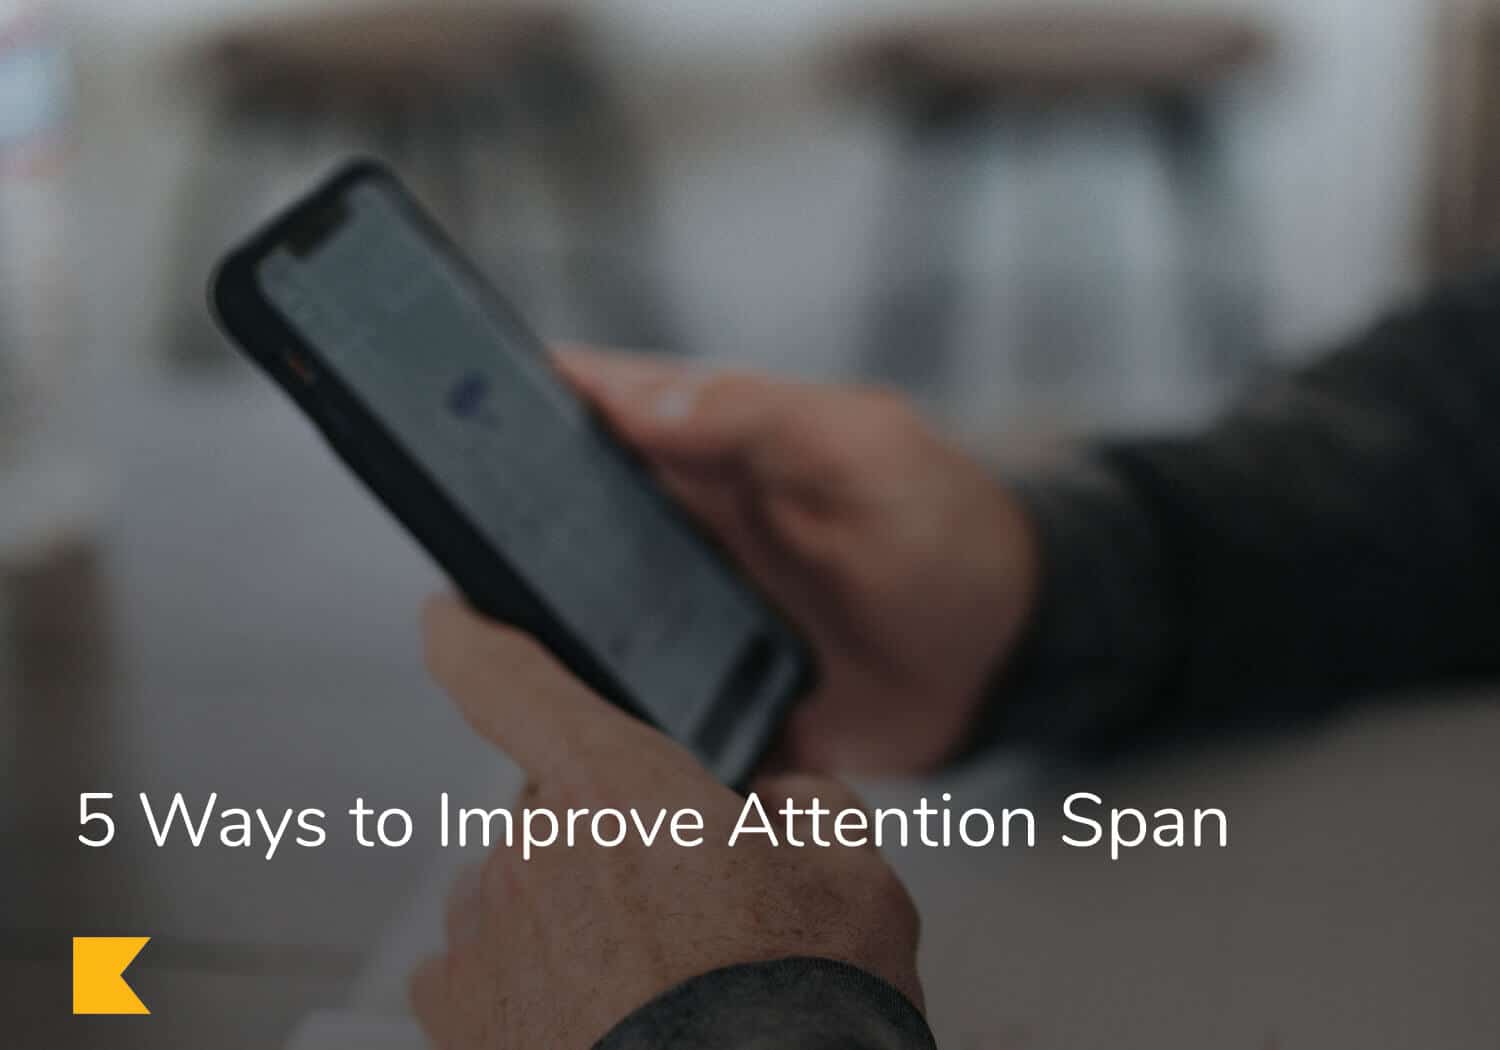 5 Ways to Improve Attention Span